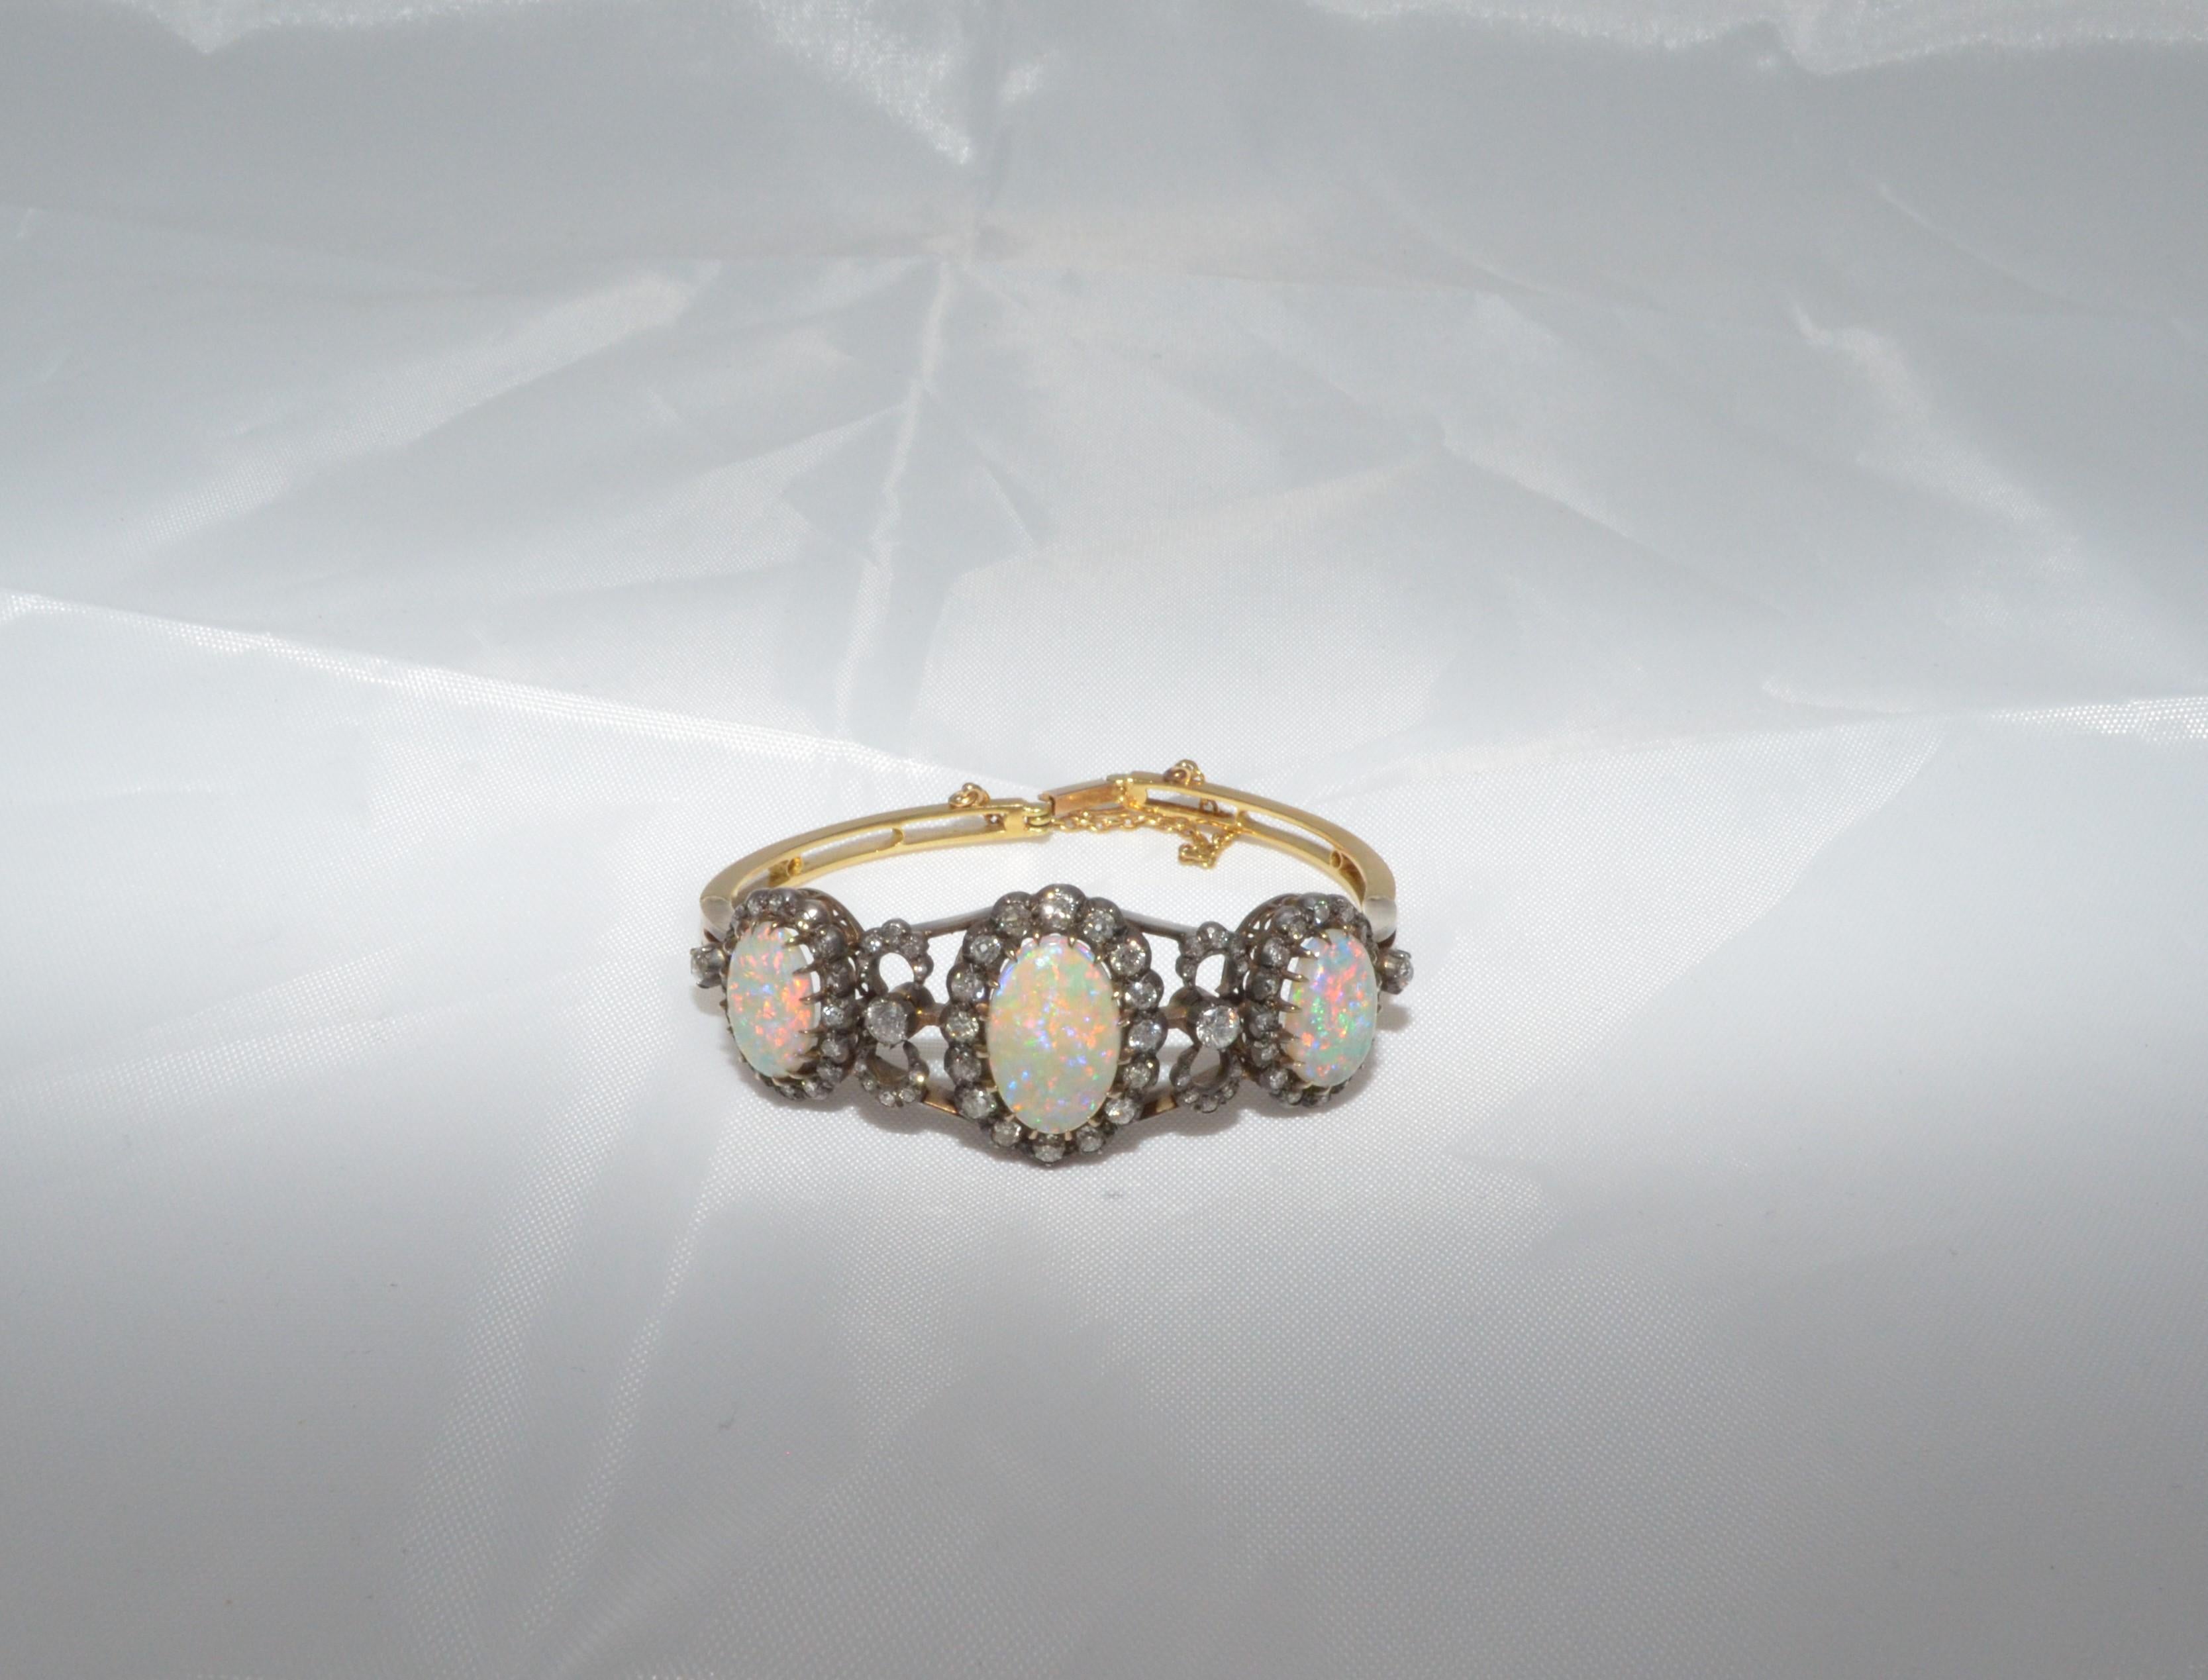 Women's Late 19th Century Victorian Gold, Silver Bracelet with Diamonds and Opals